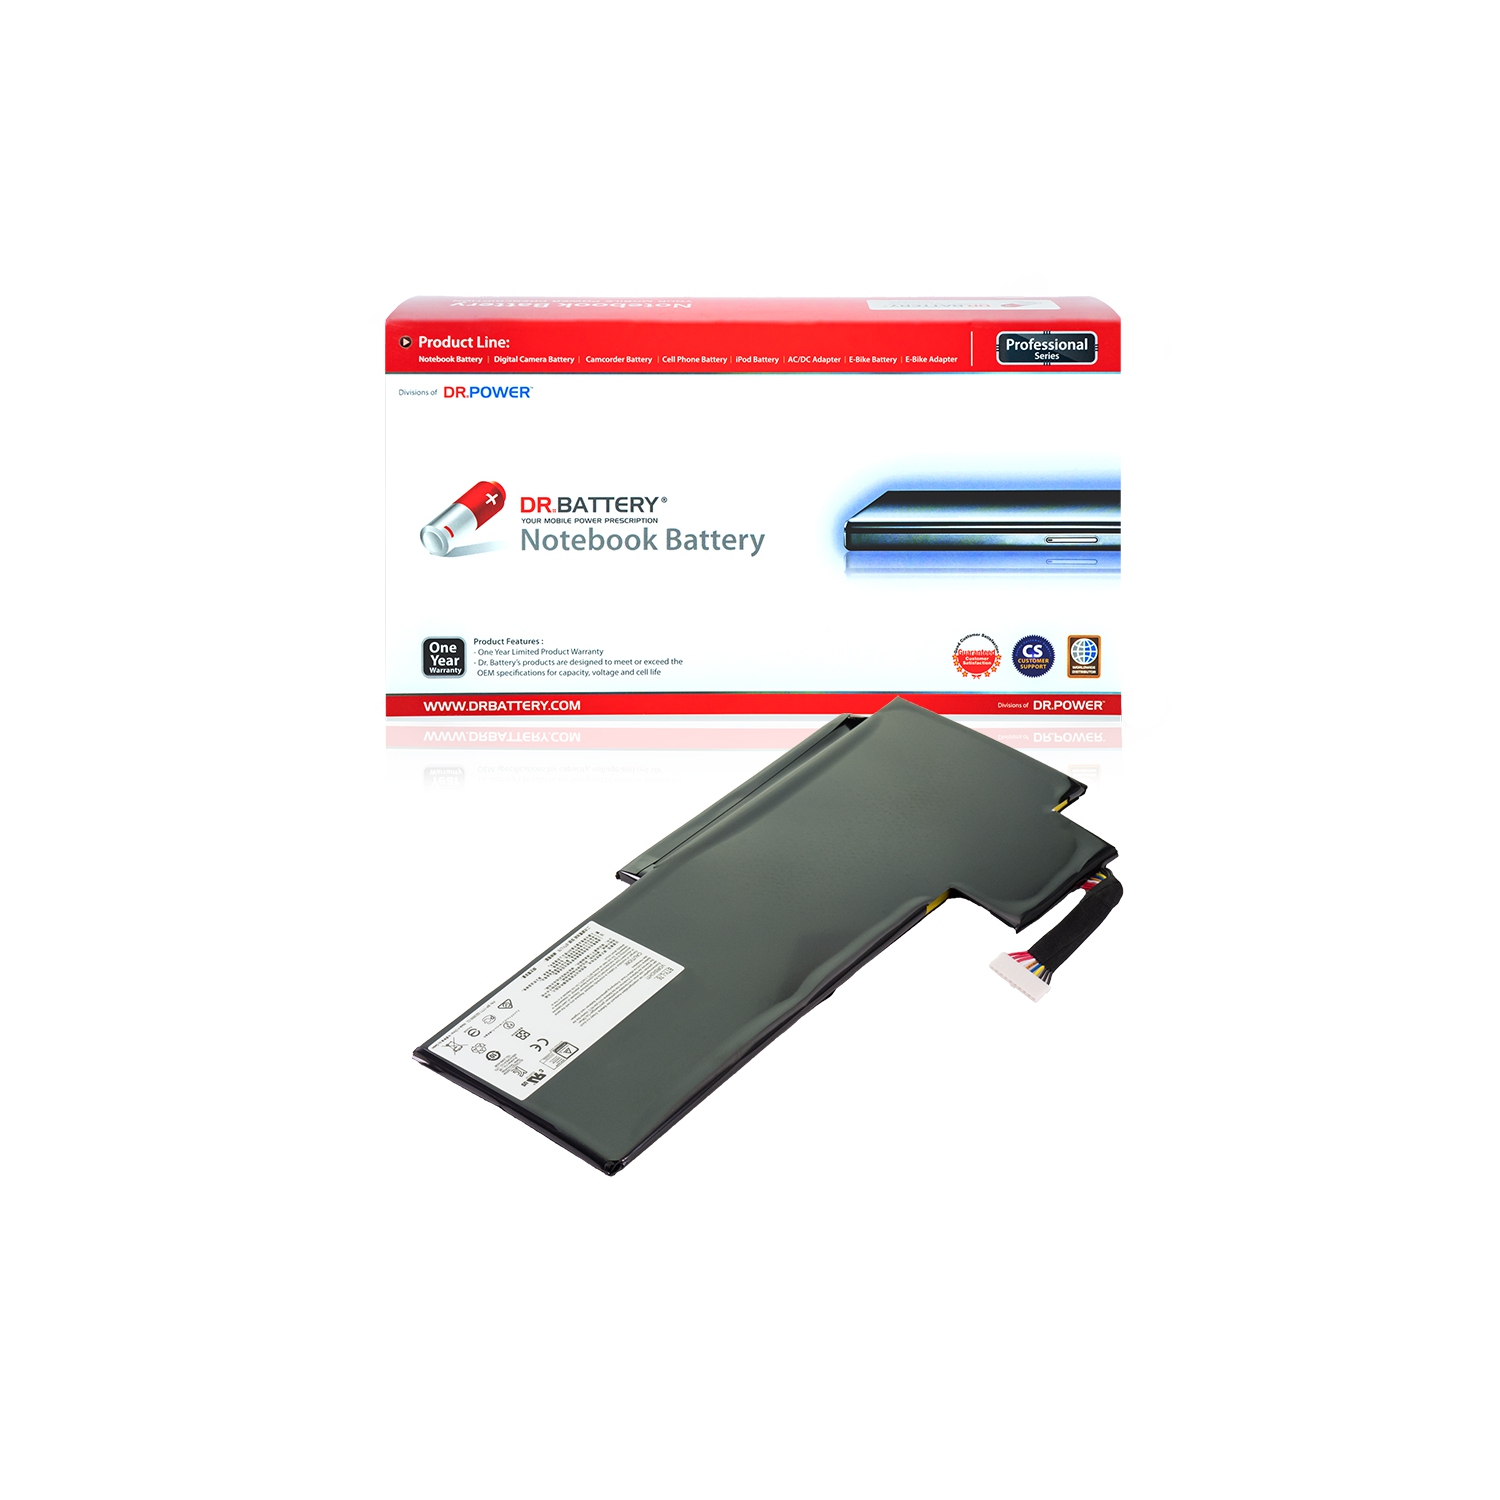 DR. BATTERY Replacement for MSI GS72 PE60 PE60 6QE-054US PE60 6QE-054US 15.6 WS72 GS70 GS70 2PC-443CN BTY-L76 [11.1V / 58.8Wh] **Free Shipping**